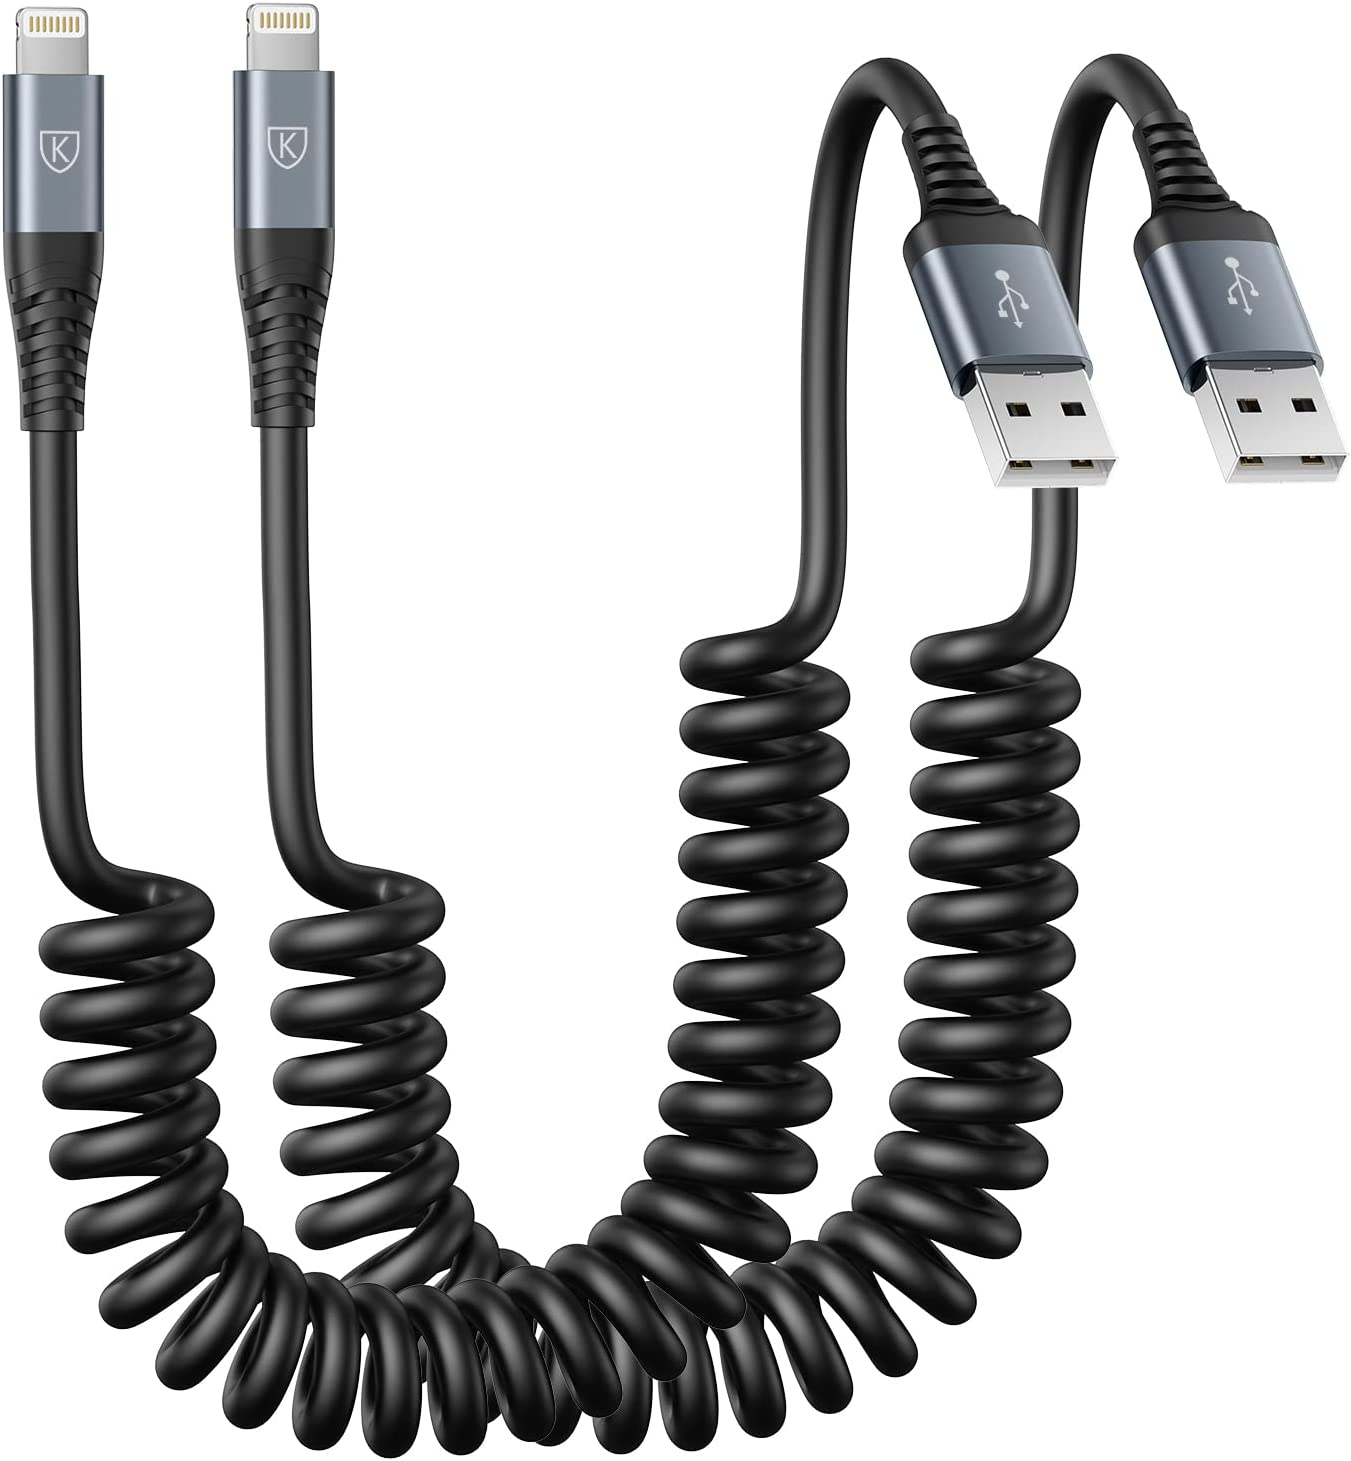 iphone cable for car review